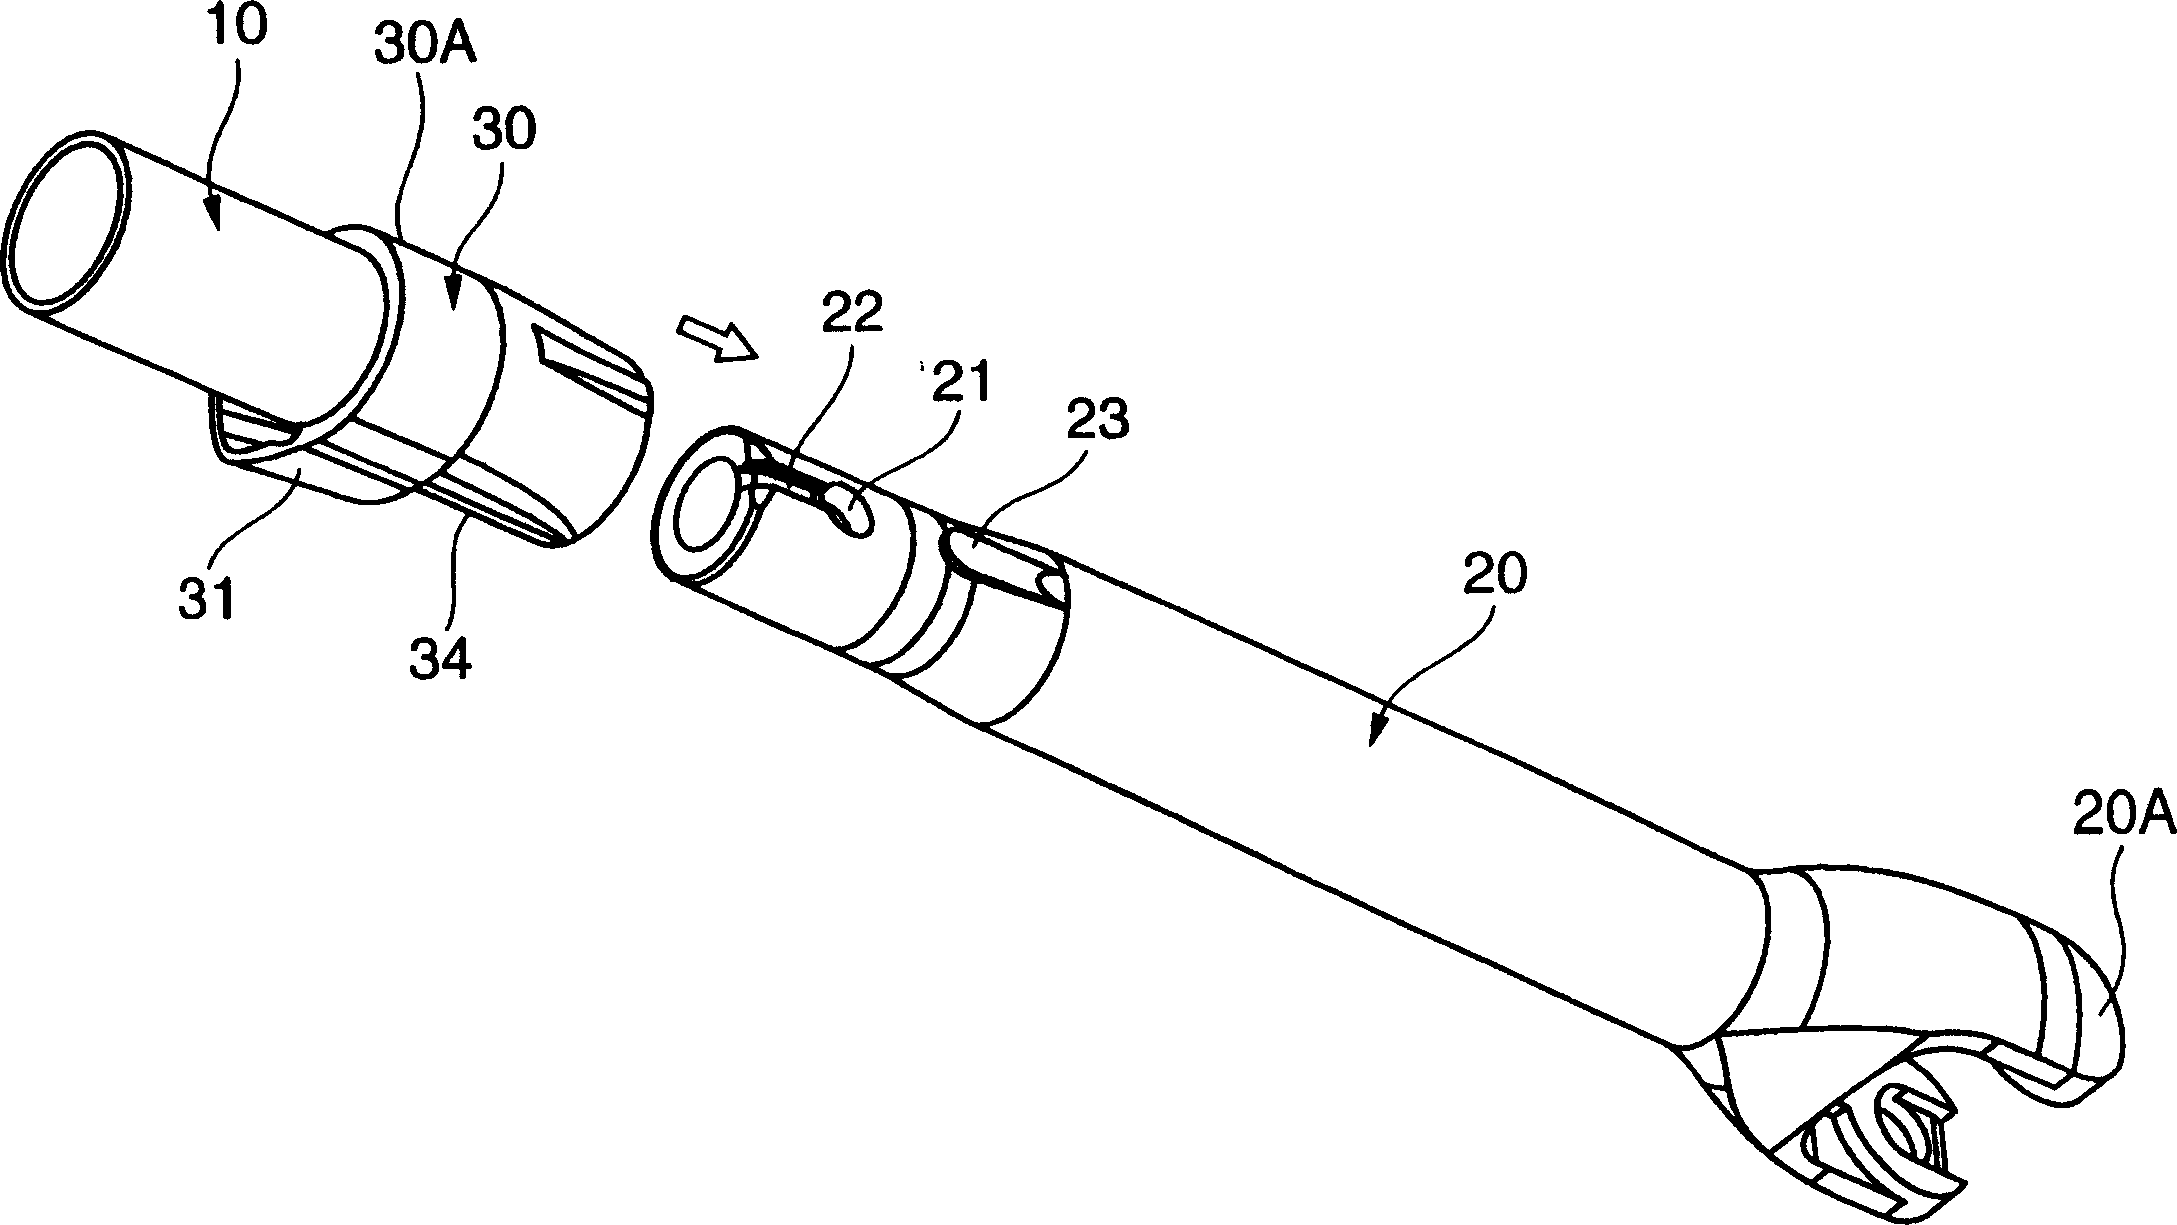 Connecting structure for rod